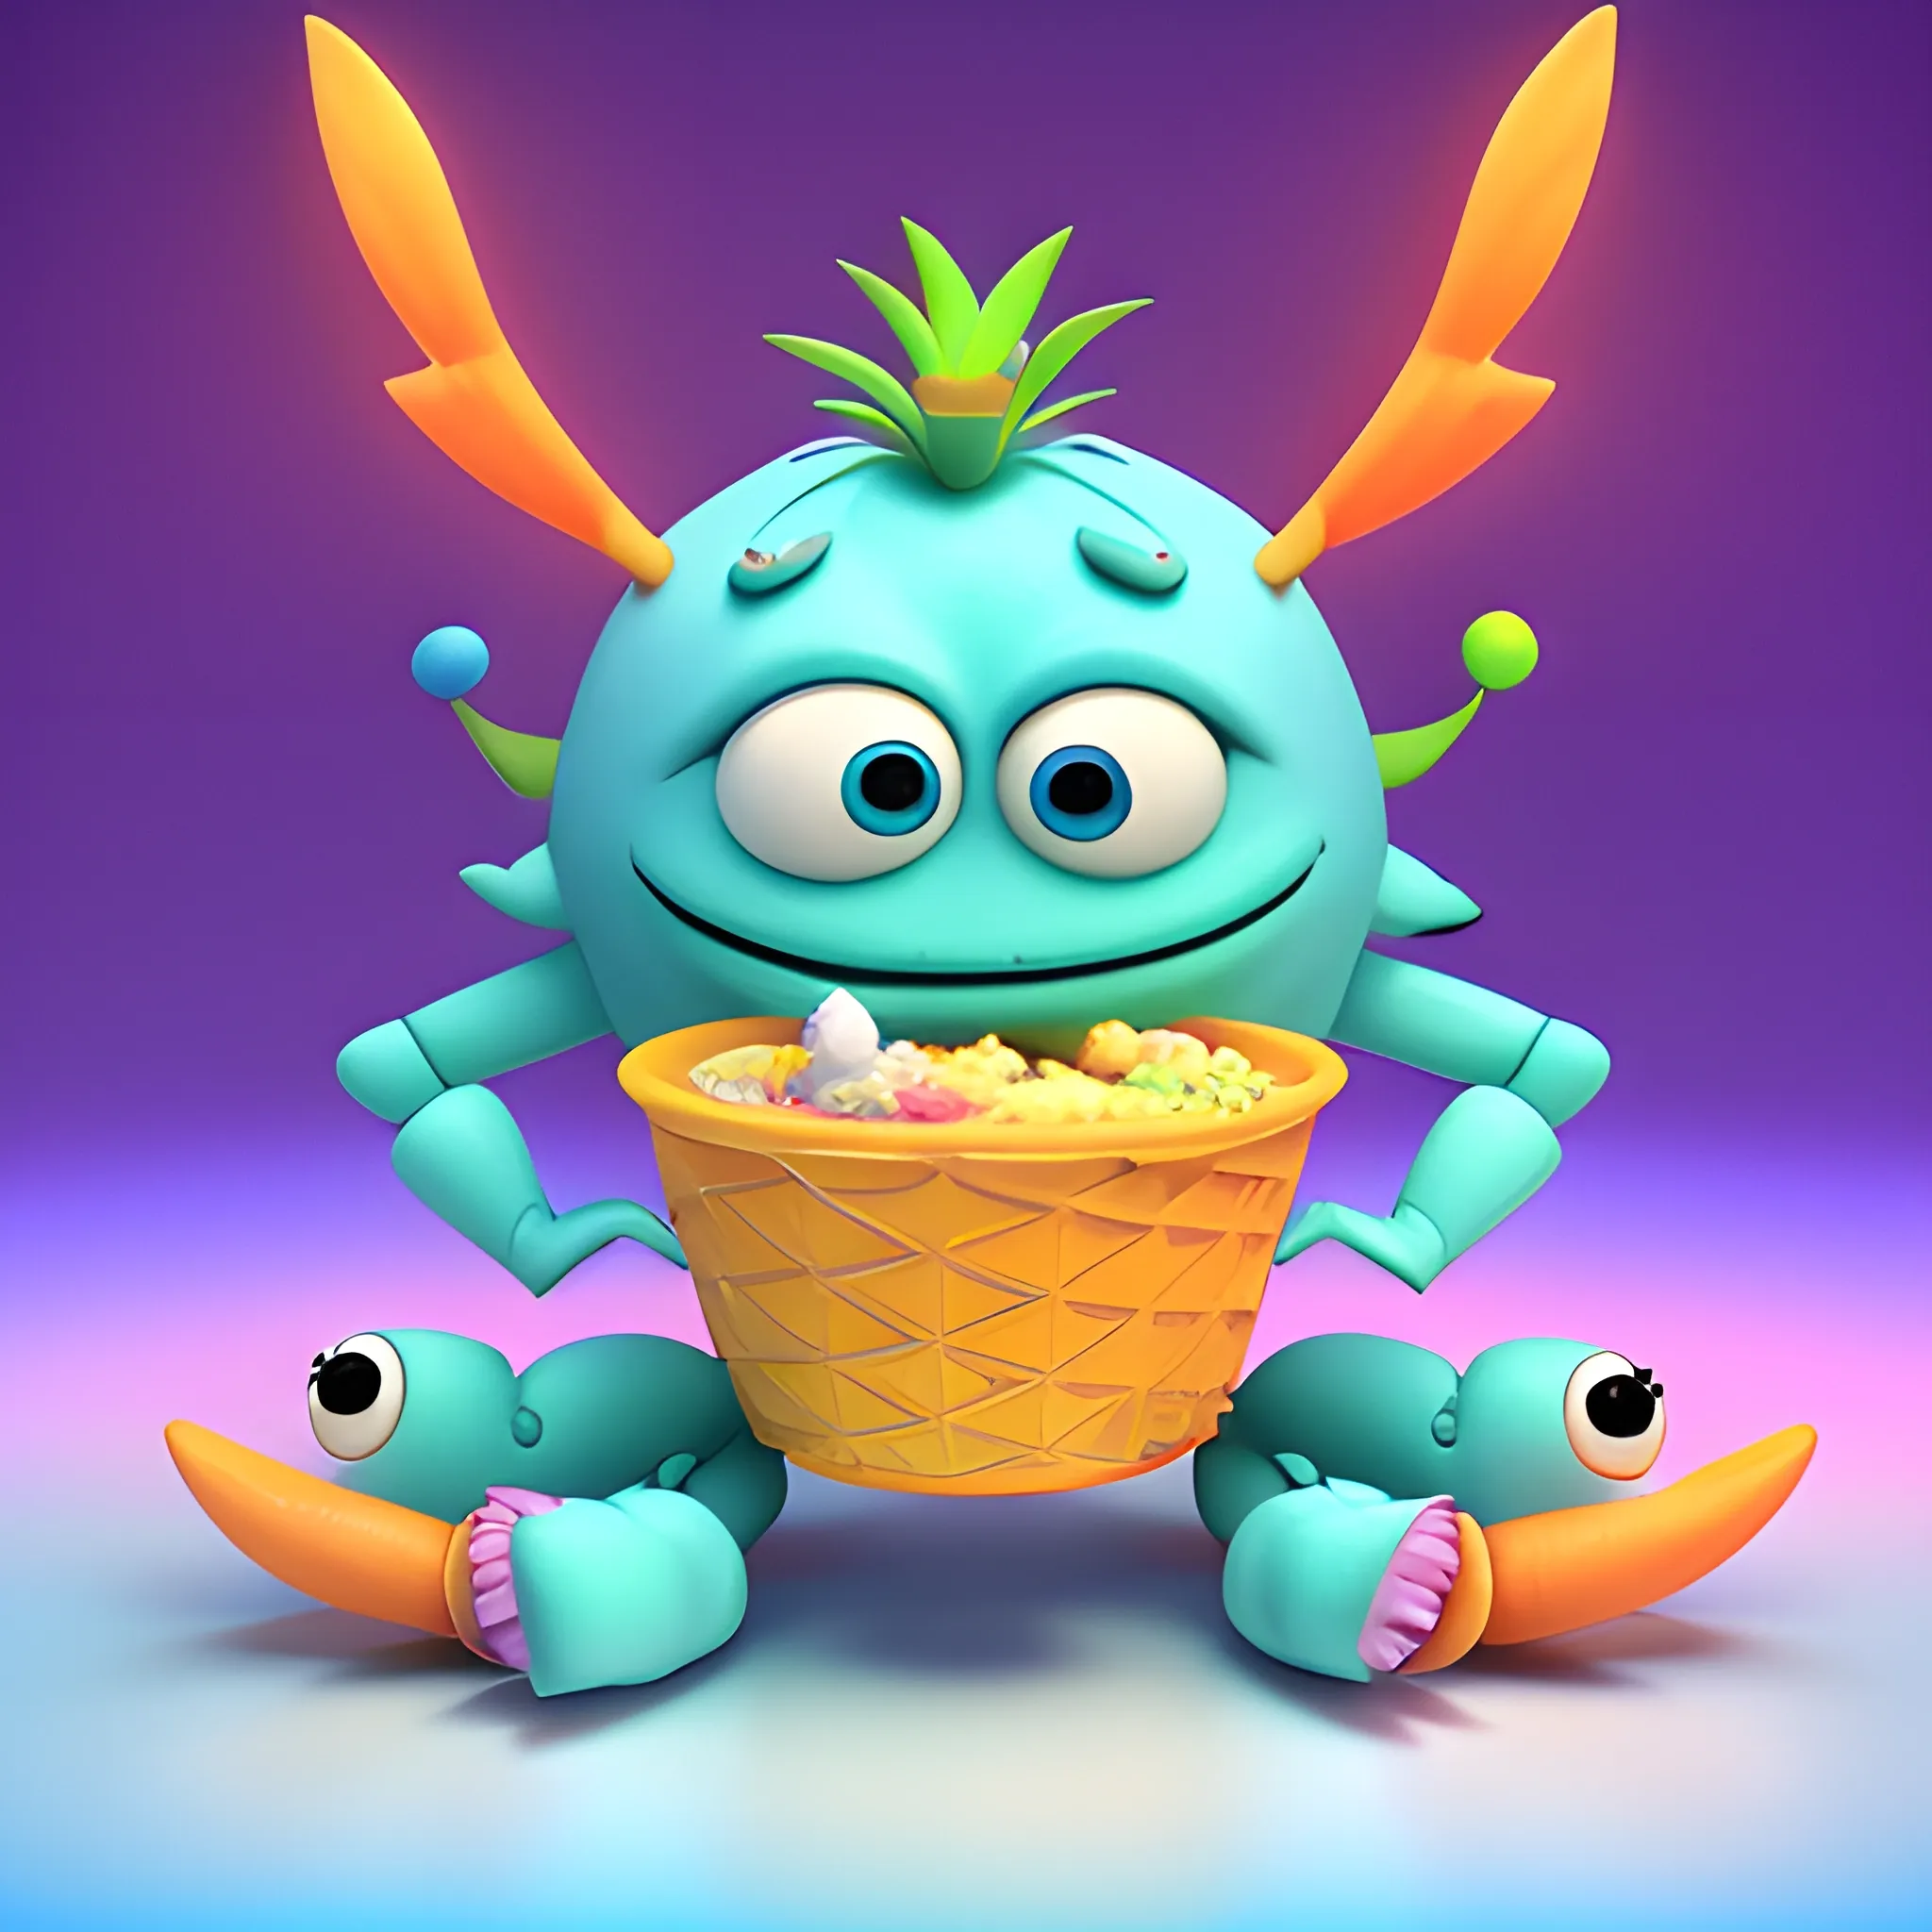 , 3D, Cartoon Cute light ivory blue Monster crab  plush shaggy  with longs tropical wings, eating  pallete ice cream cherry orange with pinaapple, 3D, Hk , kwaii, like monster inc of pixar style, two saturate light filter color